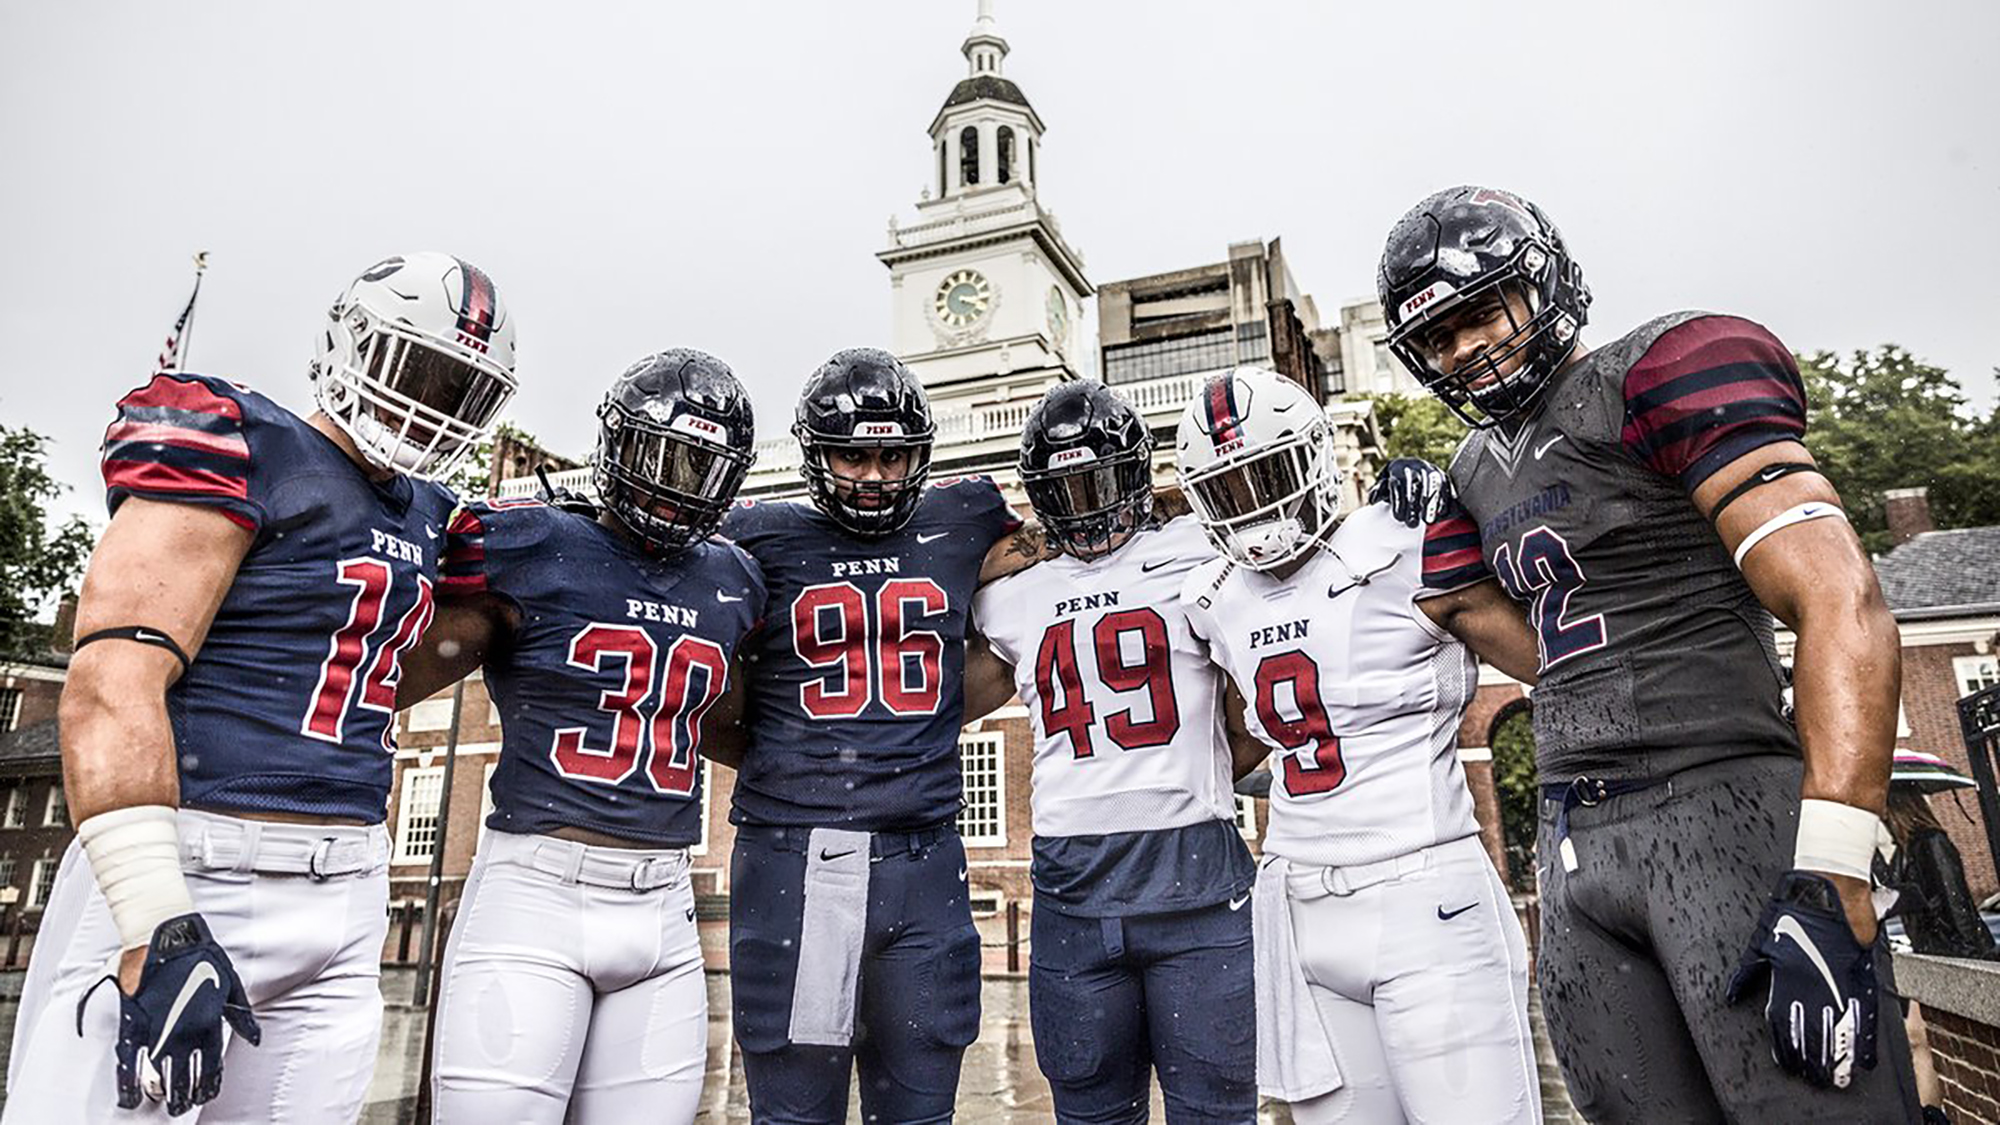 Football team to play in China in 2019 Penn Today